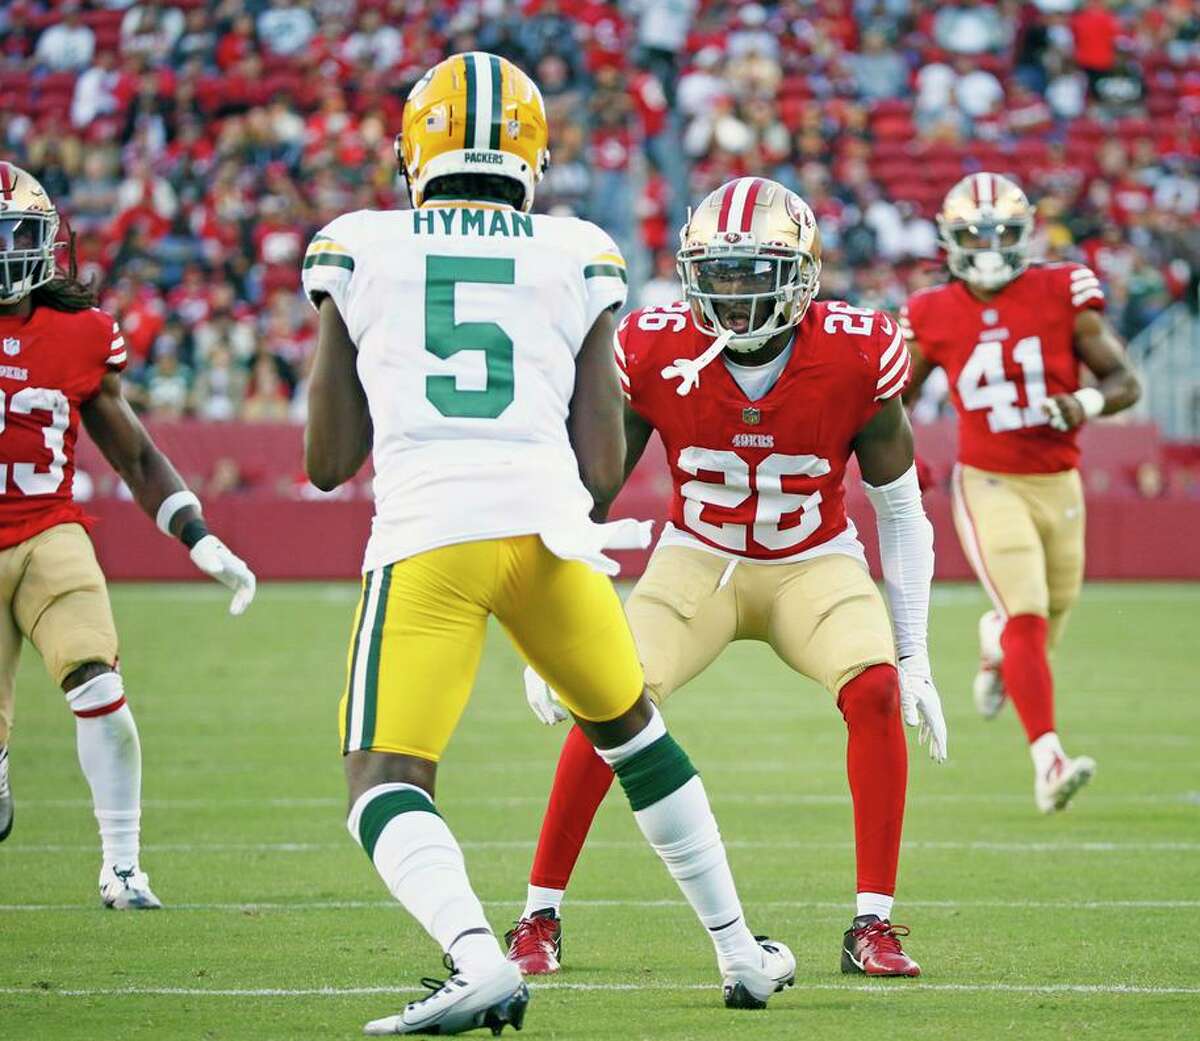 San Francisco 49ers cornerback Samuel Womack III (26) in the second half of an NFL preseason game against the Green Bay Packers at Levi's Stadium, Friday, Aug. 12, 2022, in Santa Clara, Calif.